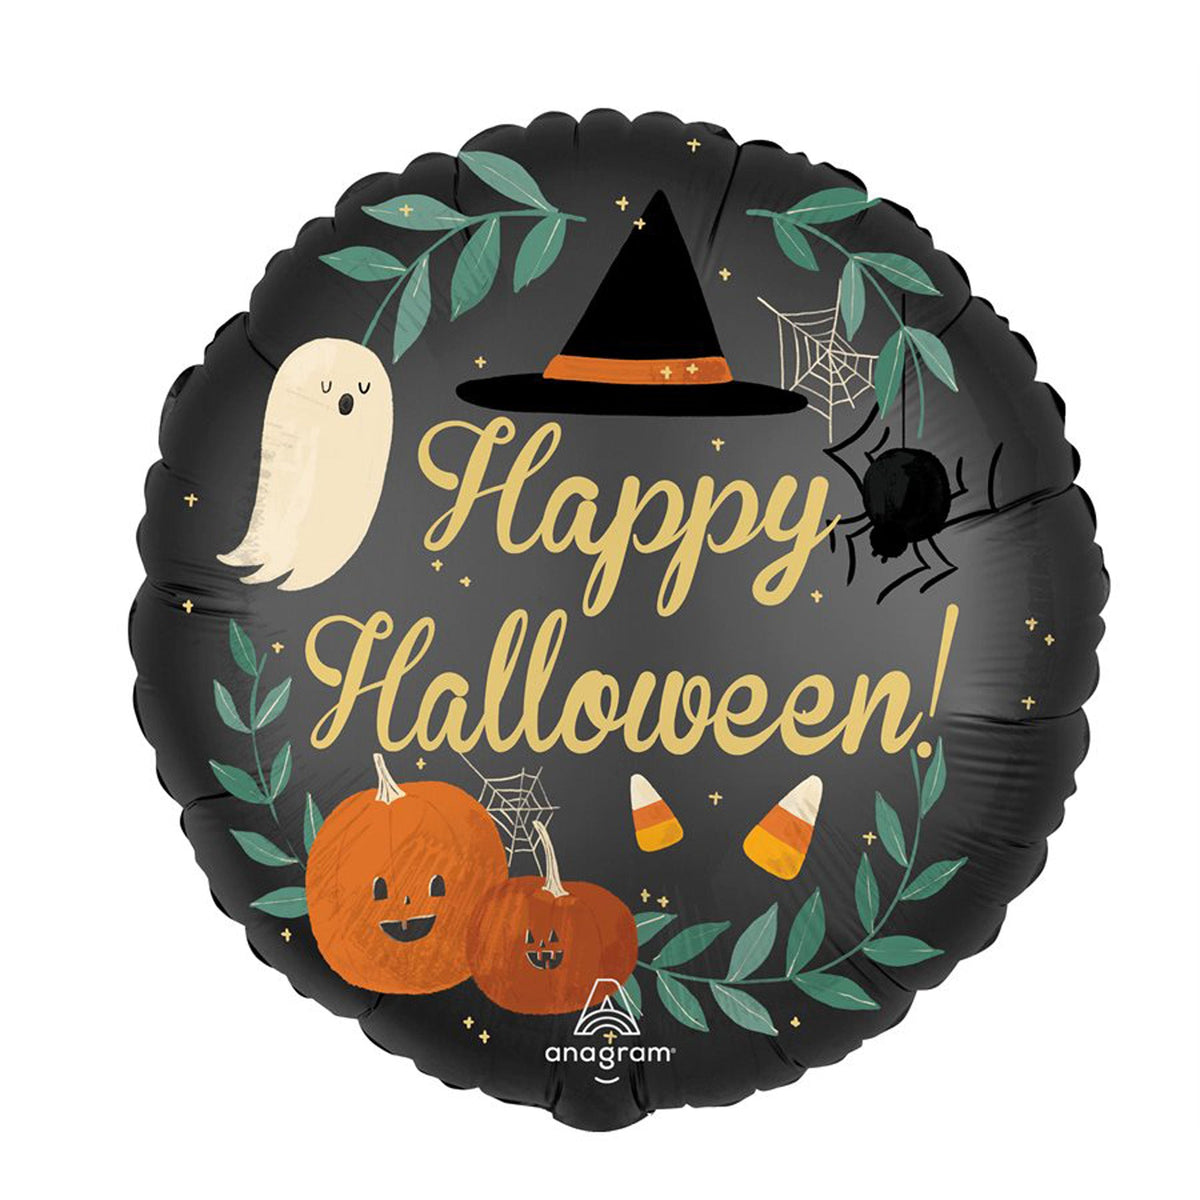 LE GROUPE BLC INTL INC Balloons Halloween Nature In The Night Satin Round Foil Balloon, "Happy Halloween", 18 Inches 026635448307